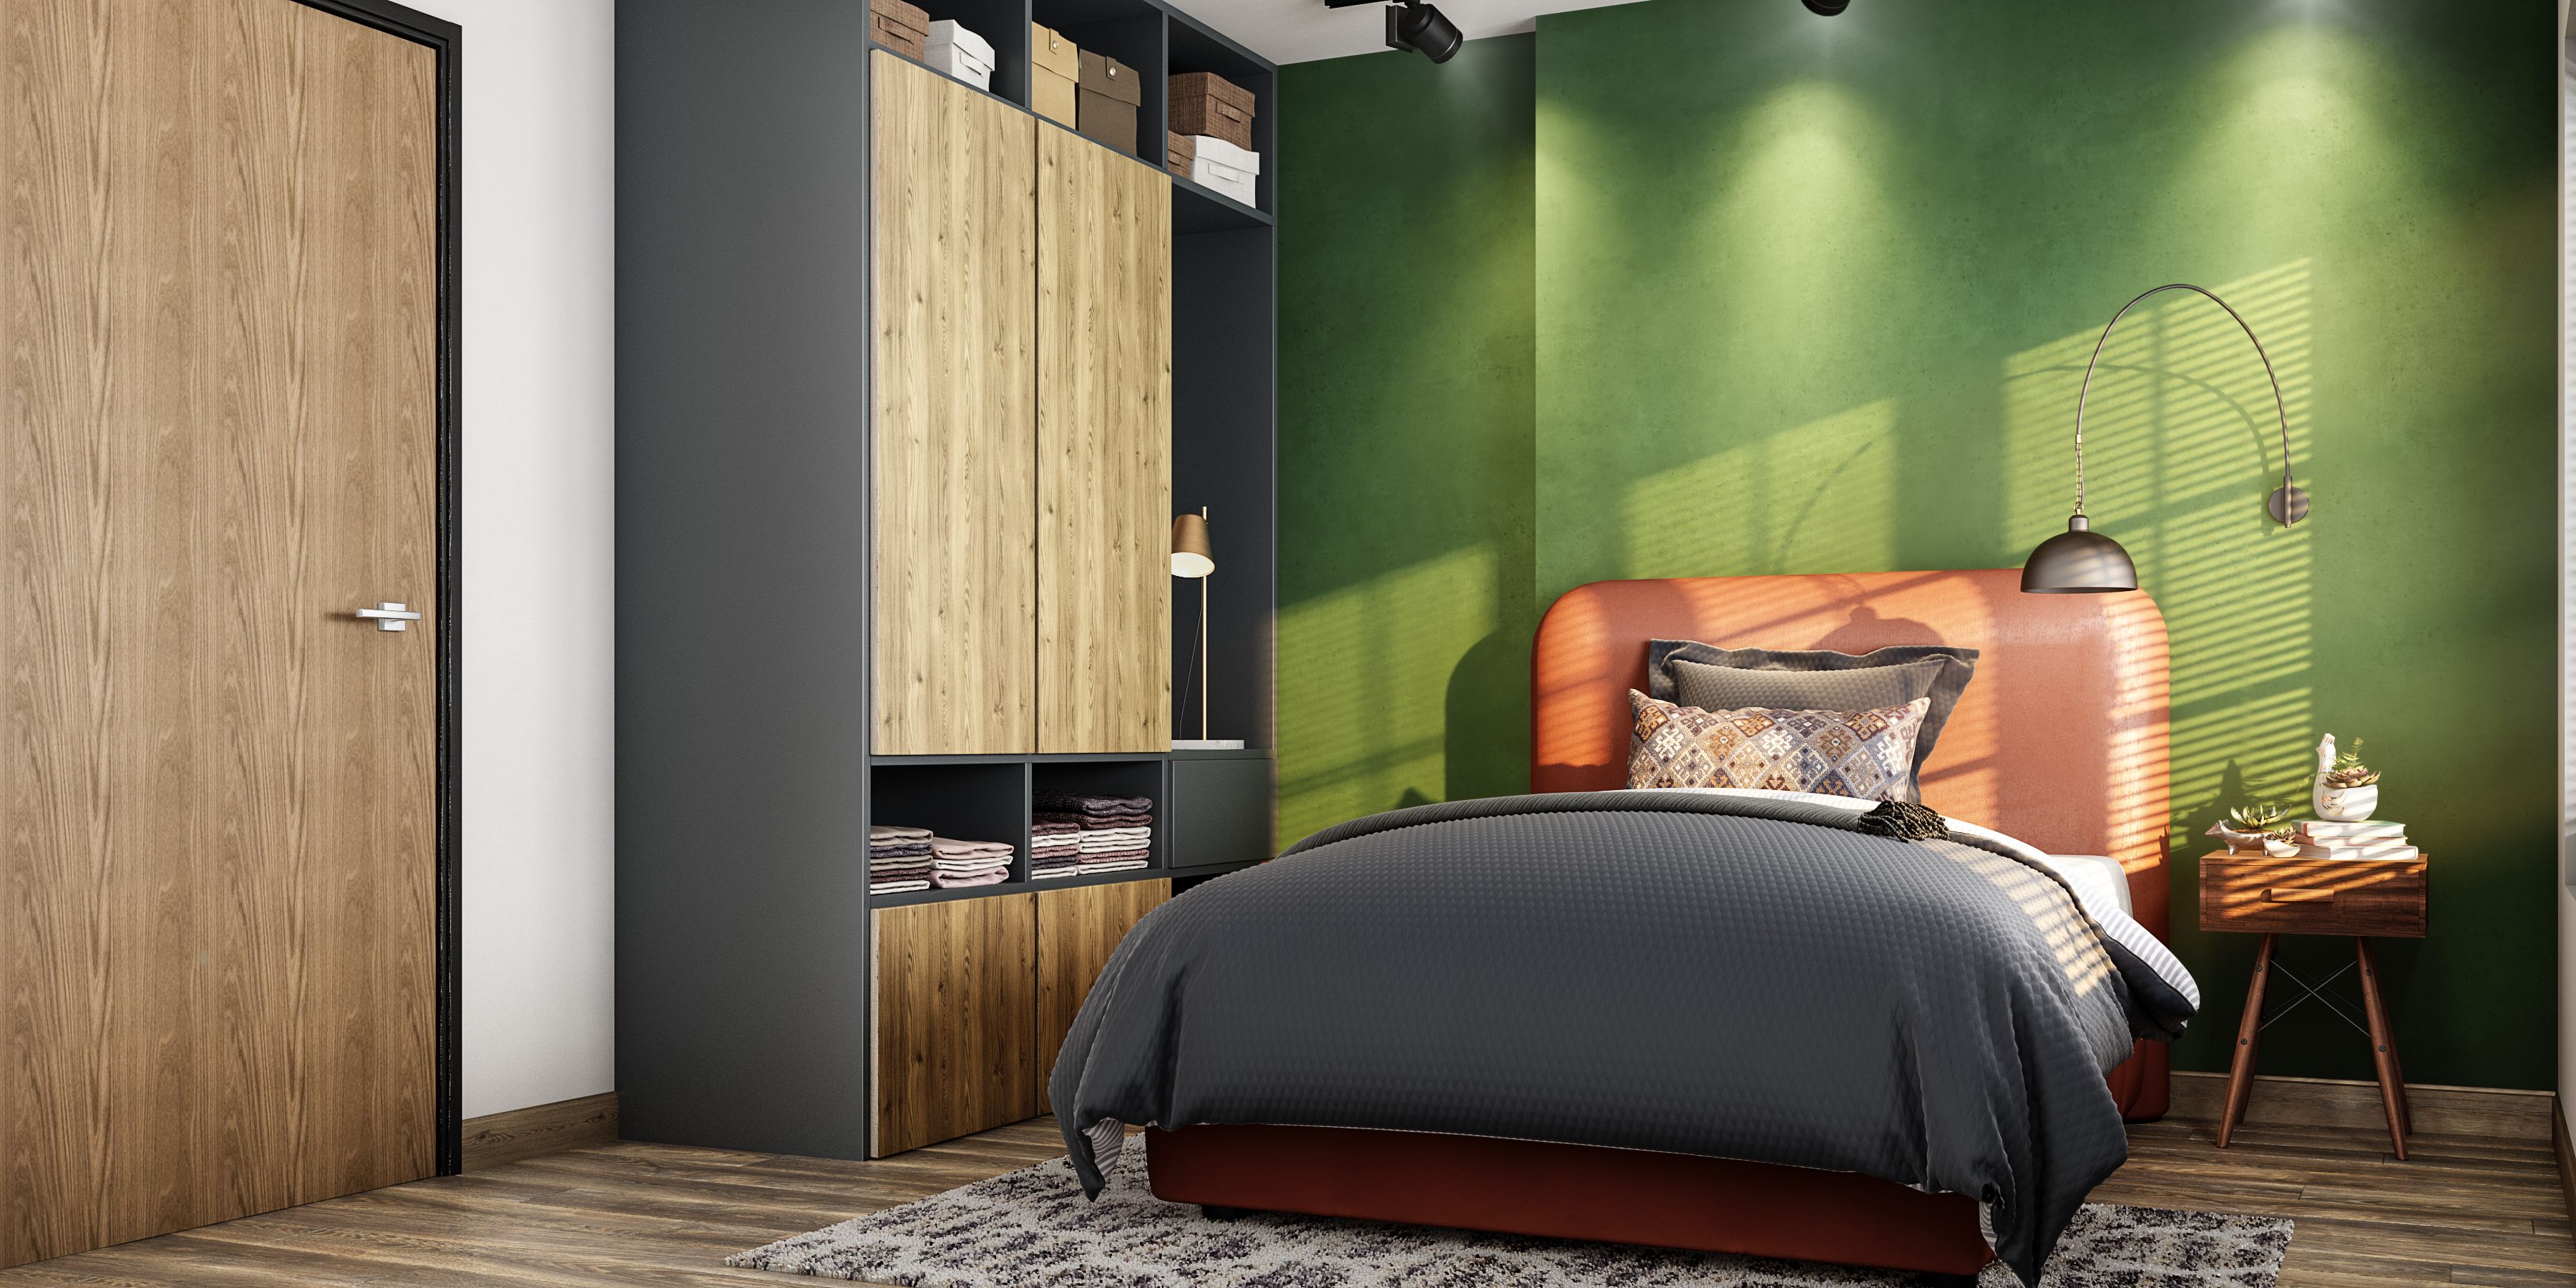 Modern Master Bedroom Design With Green Wall And Rustic Bed